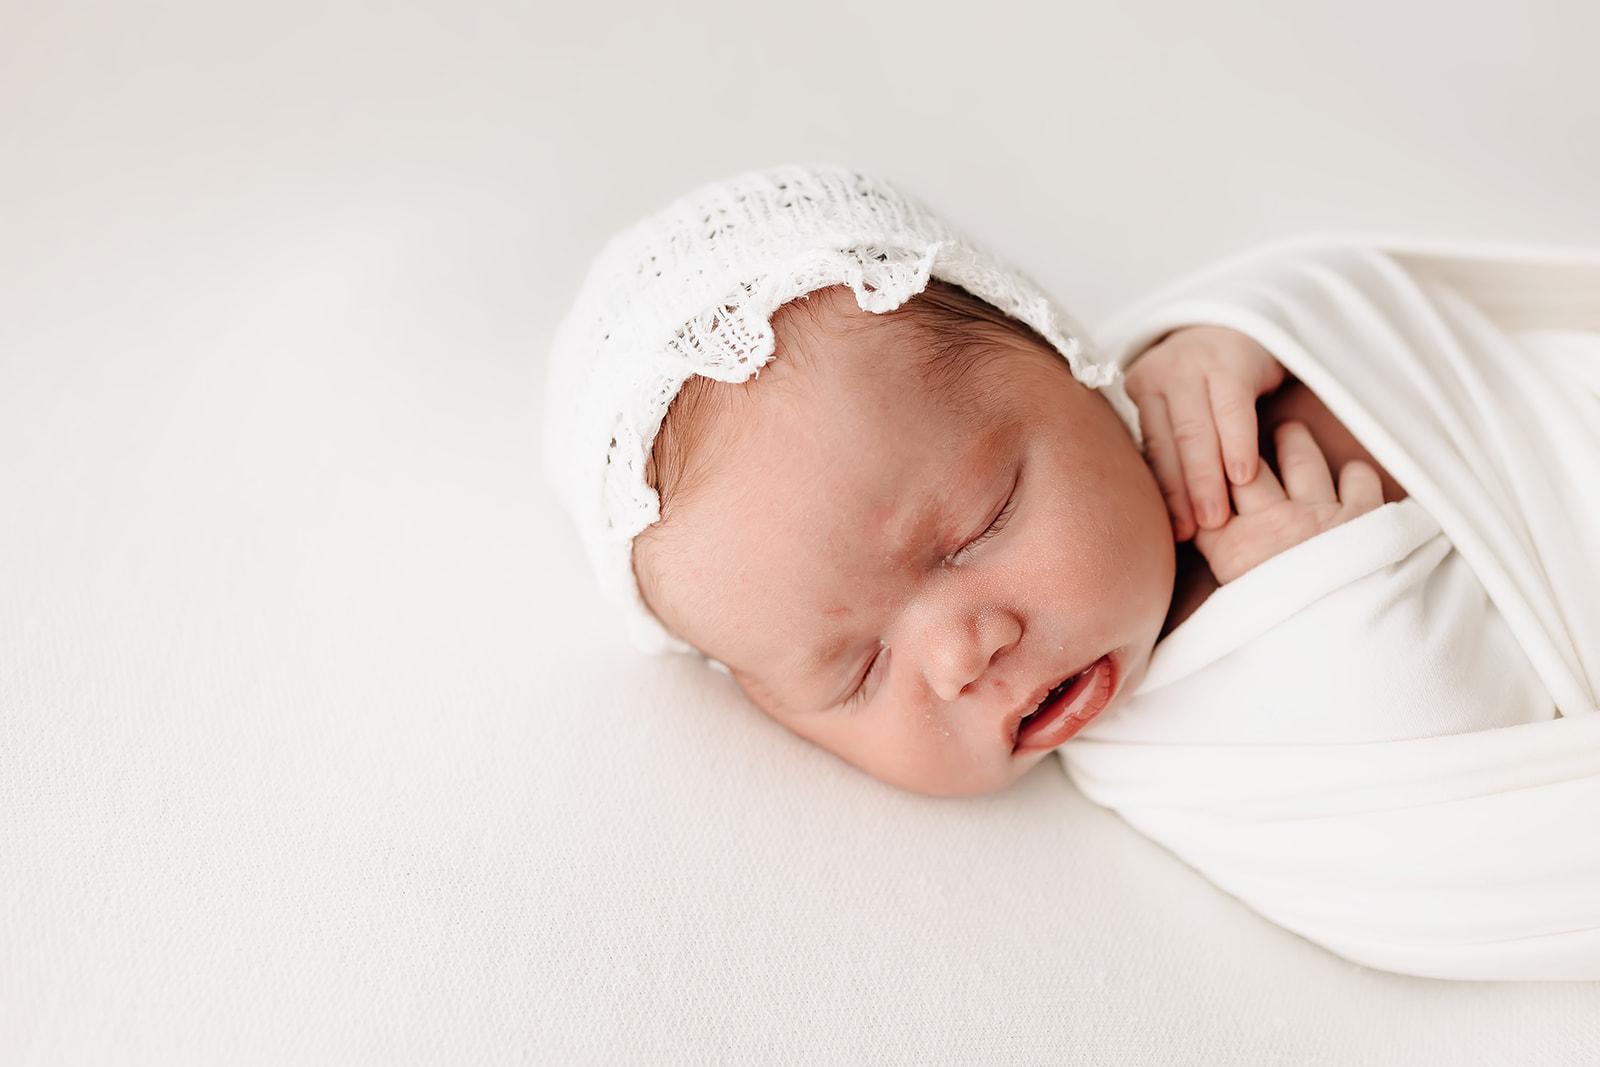 A newborn baby sleeps in a studio on a white bed with hands swaddled under her chin